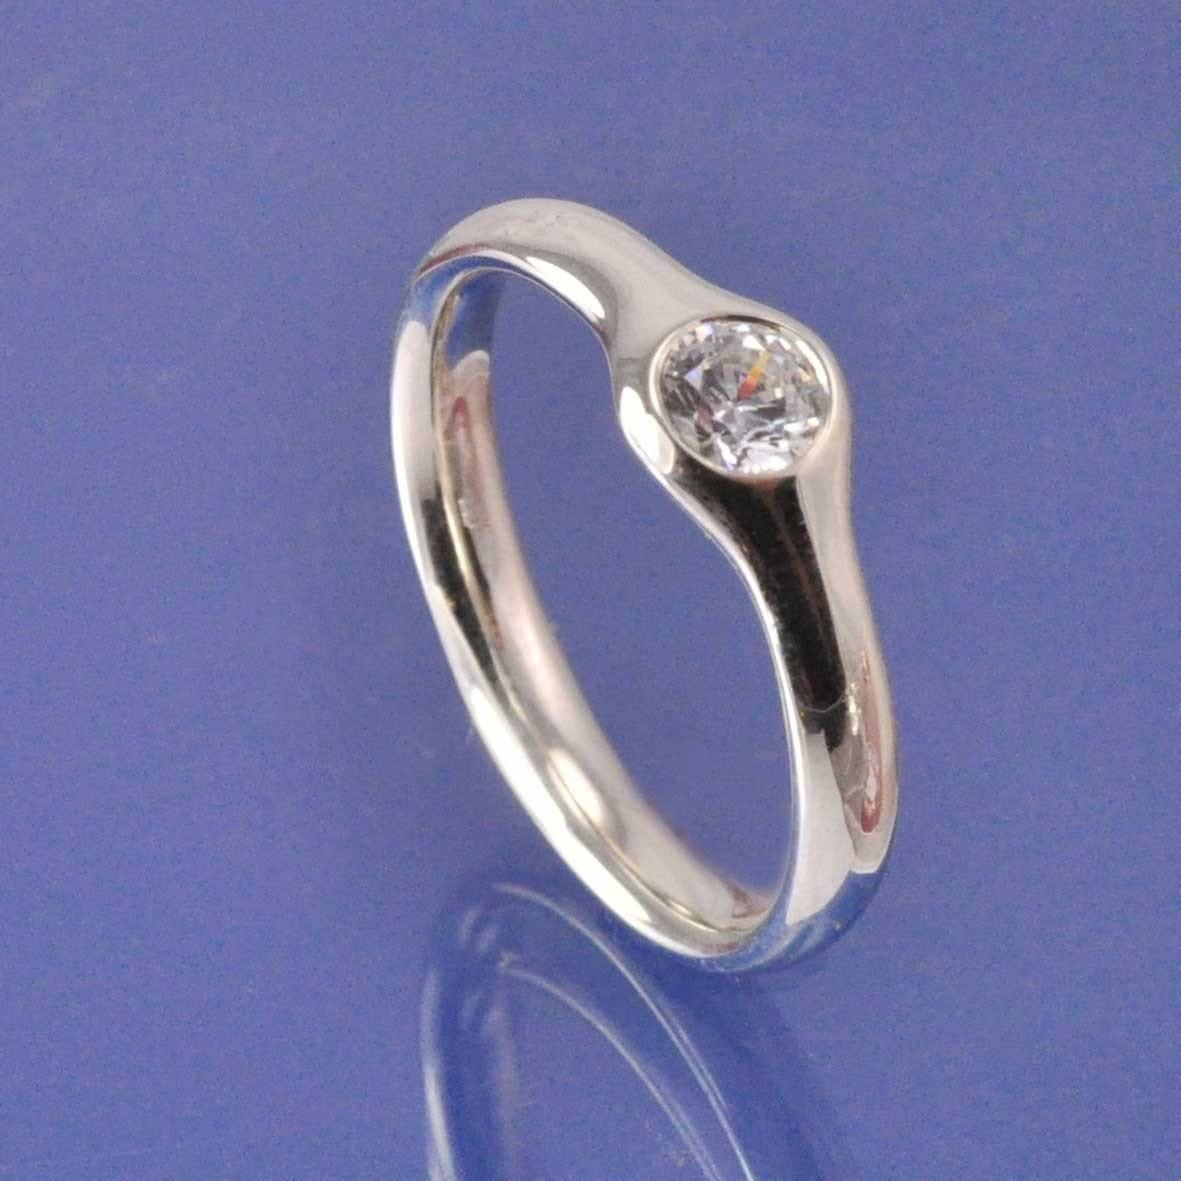 Future Diamond Ring Ring by Chris Parry Jewellery